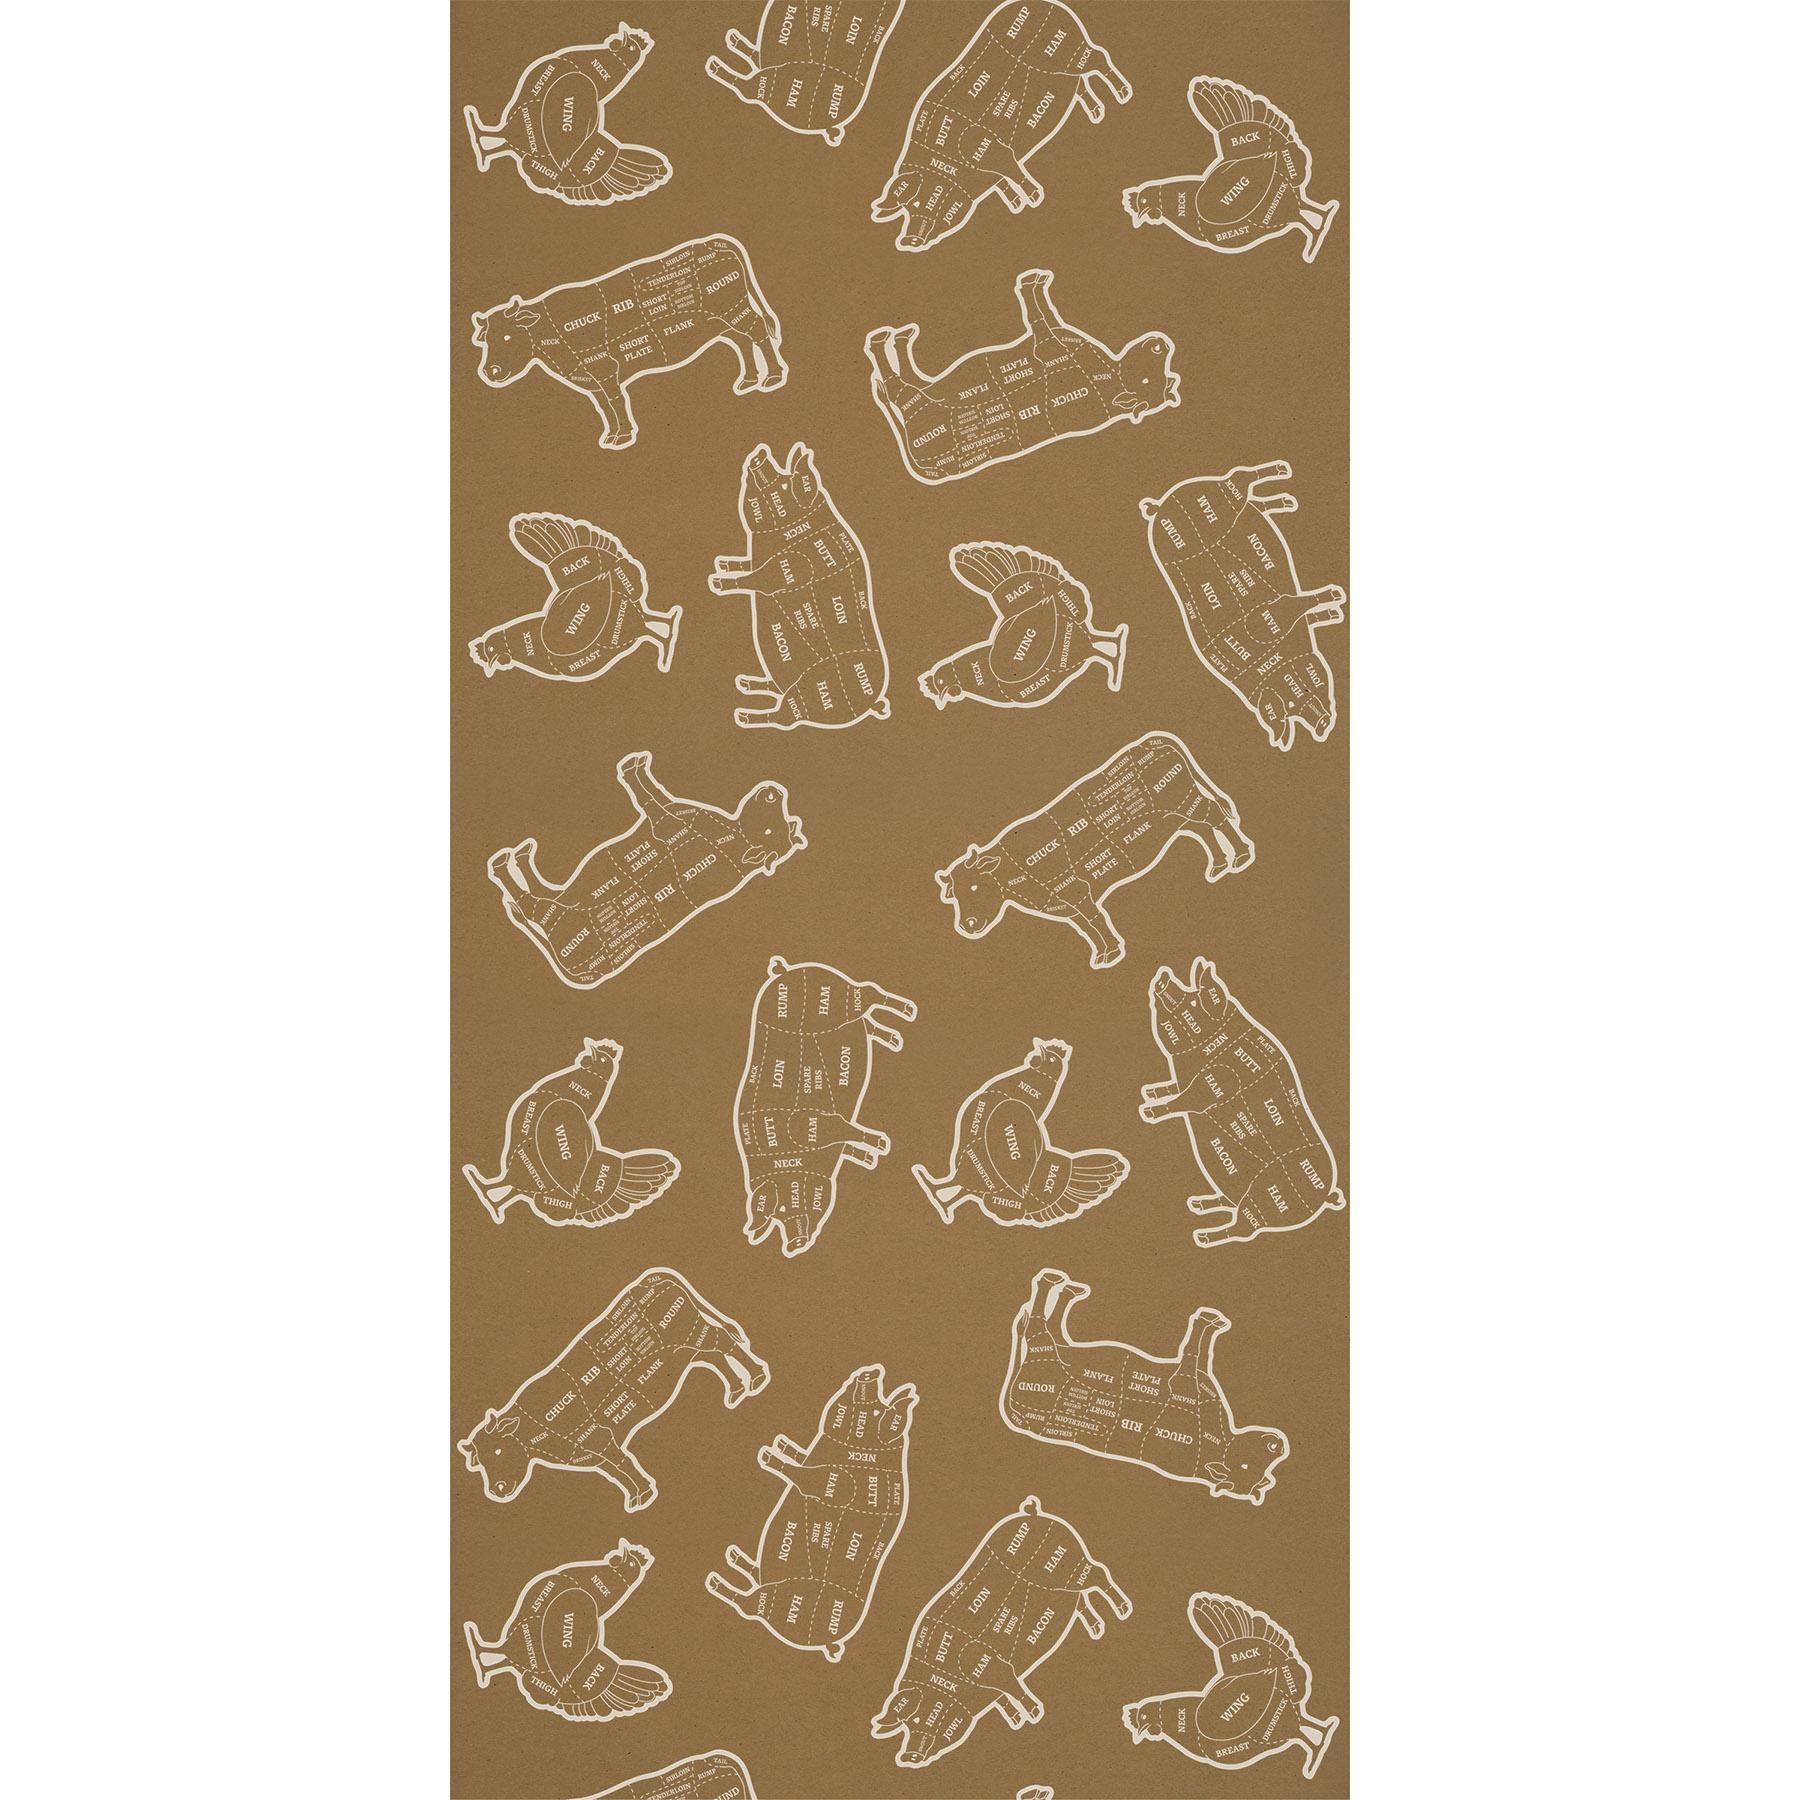 Beistle BBQ Kraft Paper Party Table Roll